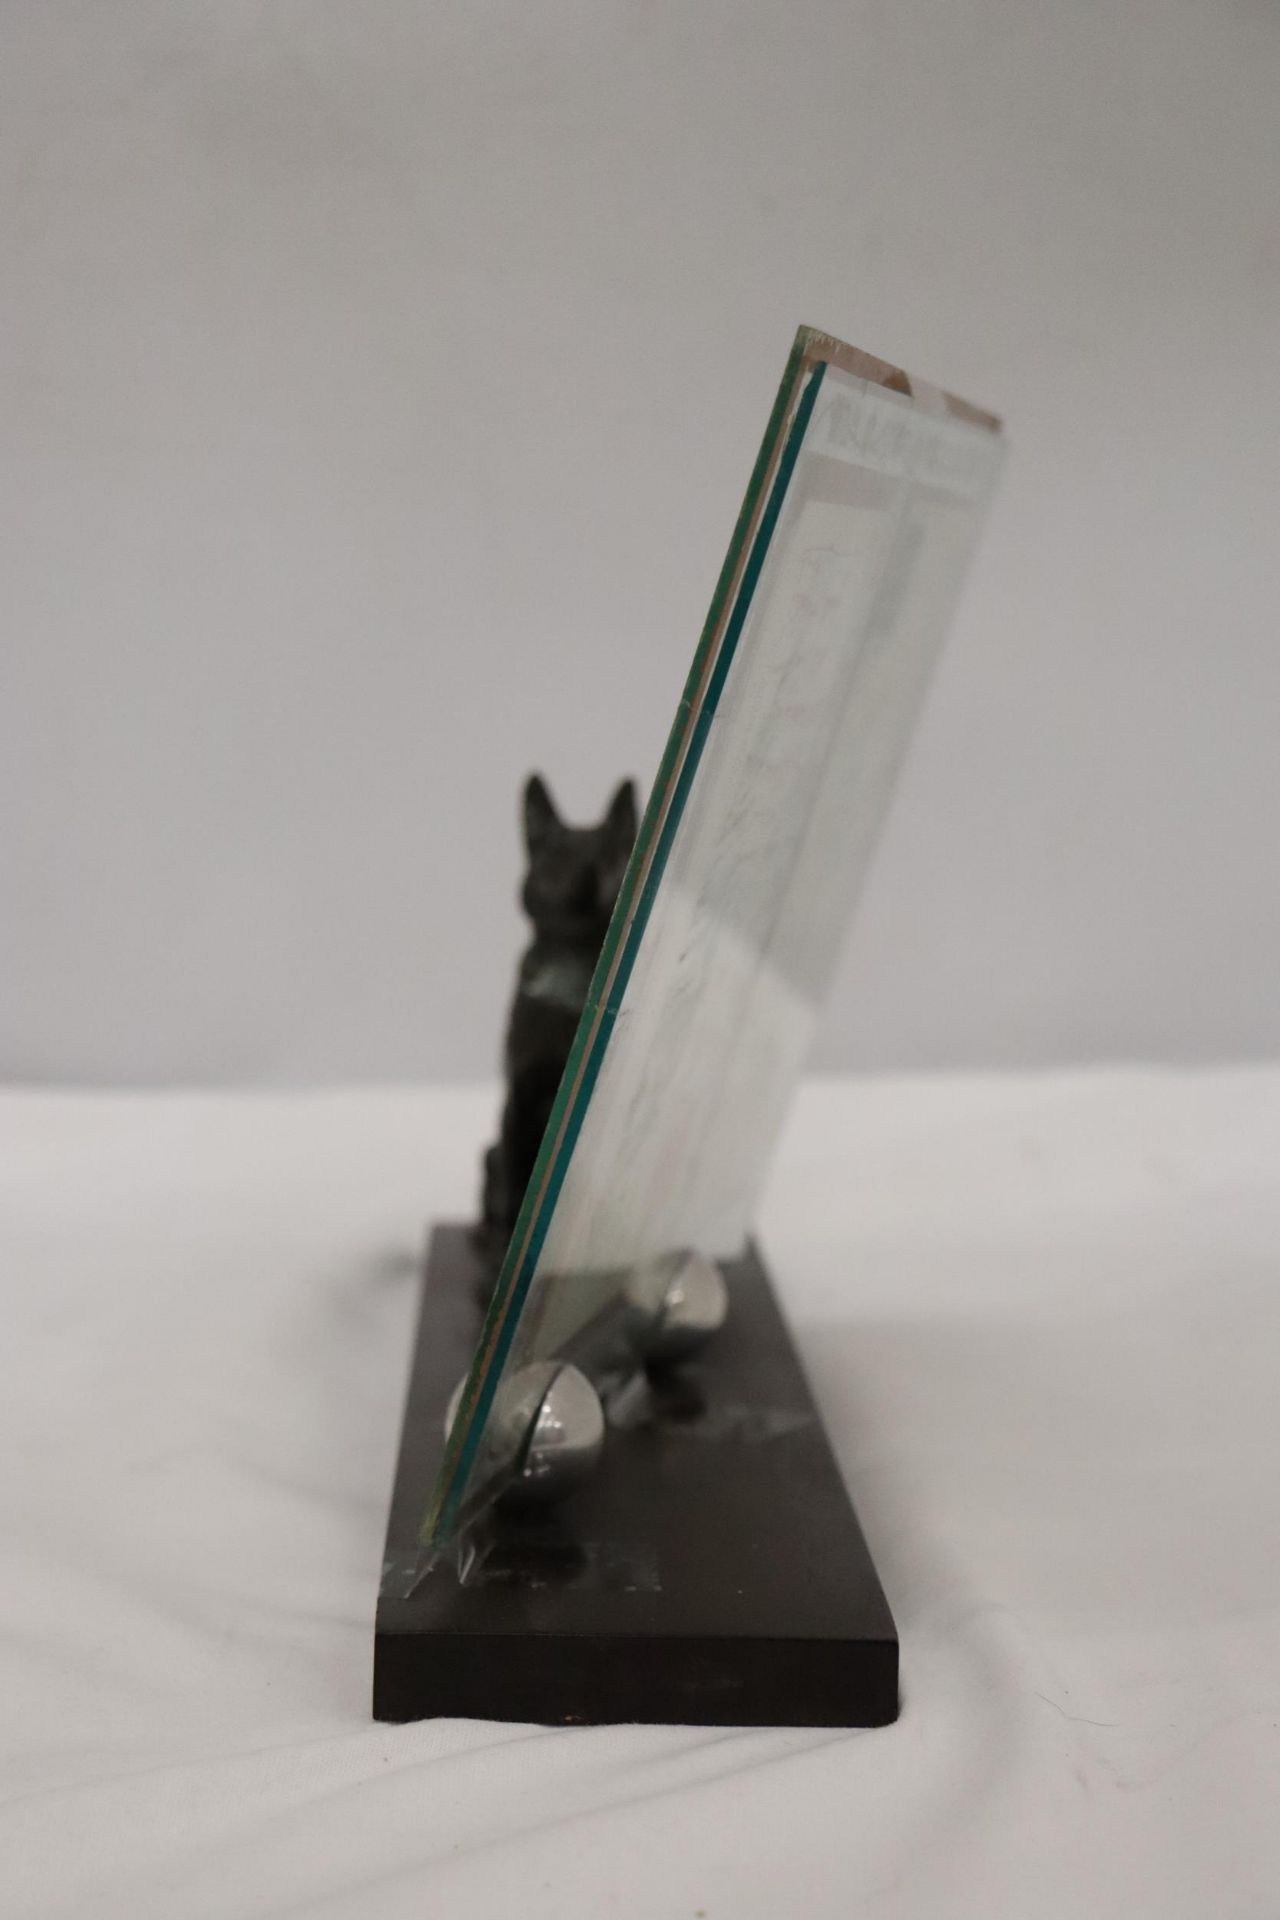 AN ART DECO DOUBLE PHOTO FRAME ON A PLINTH FEATURING A GERMAN SHEPHERD DOG FIGURE - Image 6 of 7